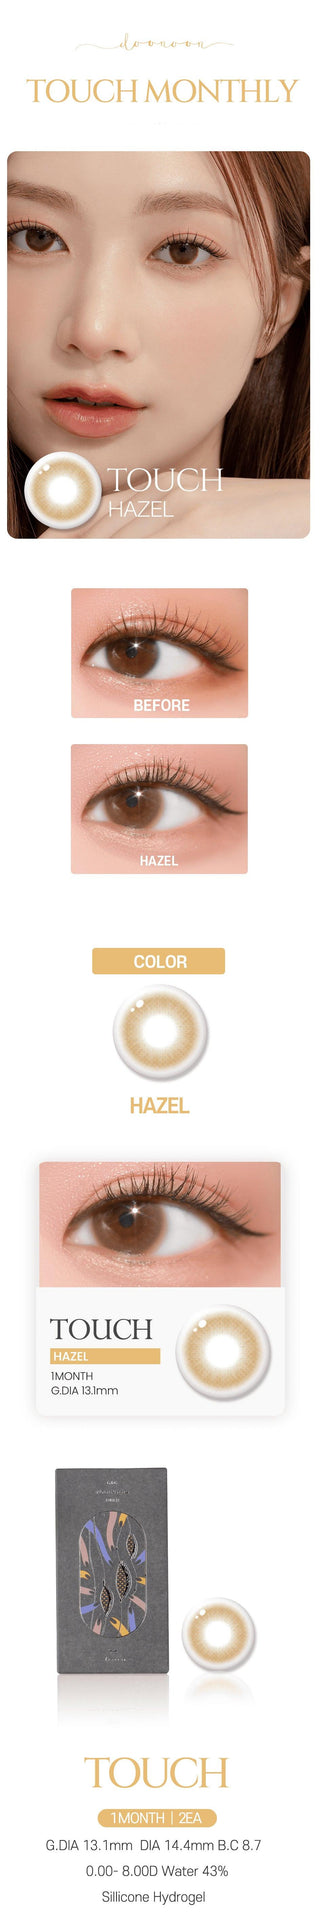 Variety of DooNoon Touch Hazel contact lens colors displayed, with closeups of an eye wearing the contact lens colors, and with a model wearing the contact lens colors showing realistic eye-enlarging effect from various angles.